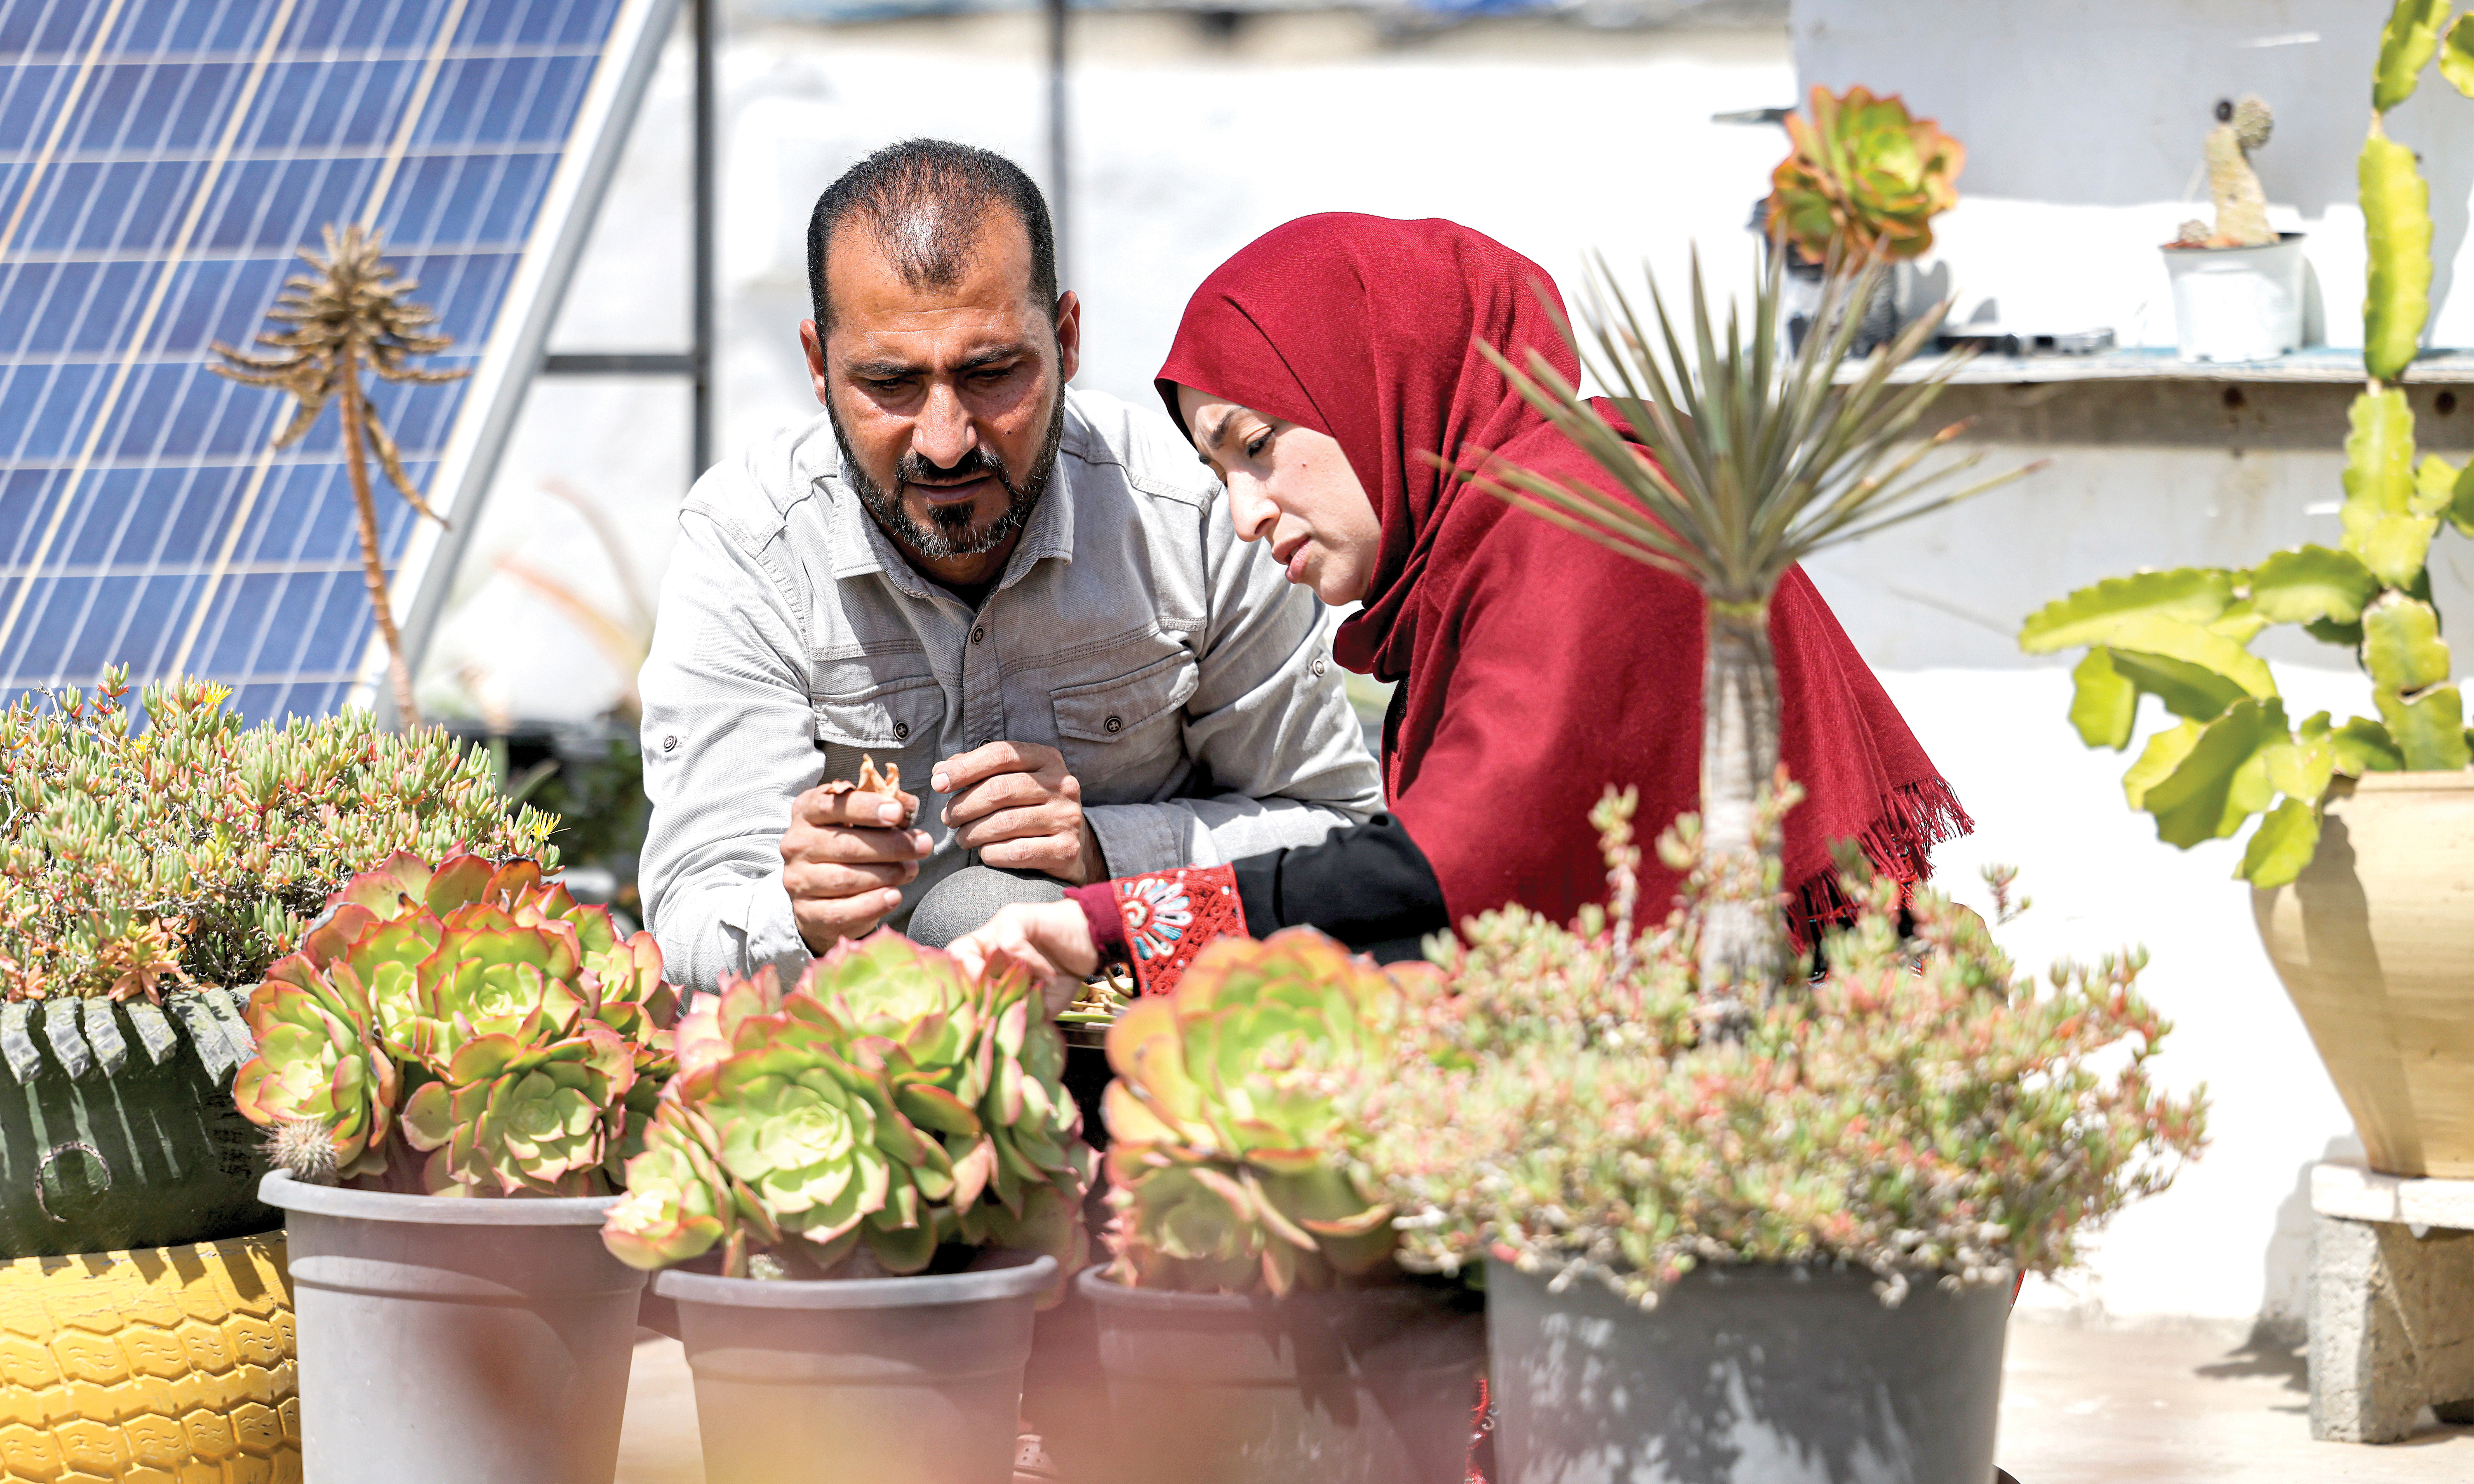 DEIR EL-BALAH, Palestinian Territories: In this picture taken on March 29, 2023, Salama Badwan, a 40-year-old Palestinian man, and his wife Alaa, 40, tend to Aloe Vera plants grown on their roof to be used for oil extraction and soap-making, at their home in Deir Al-Balah in the centre of the Gaza Strip. -- AFP